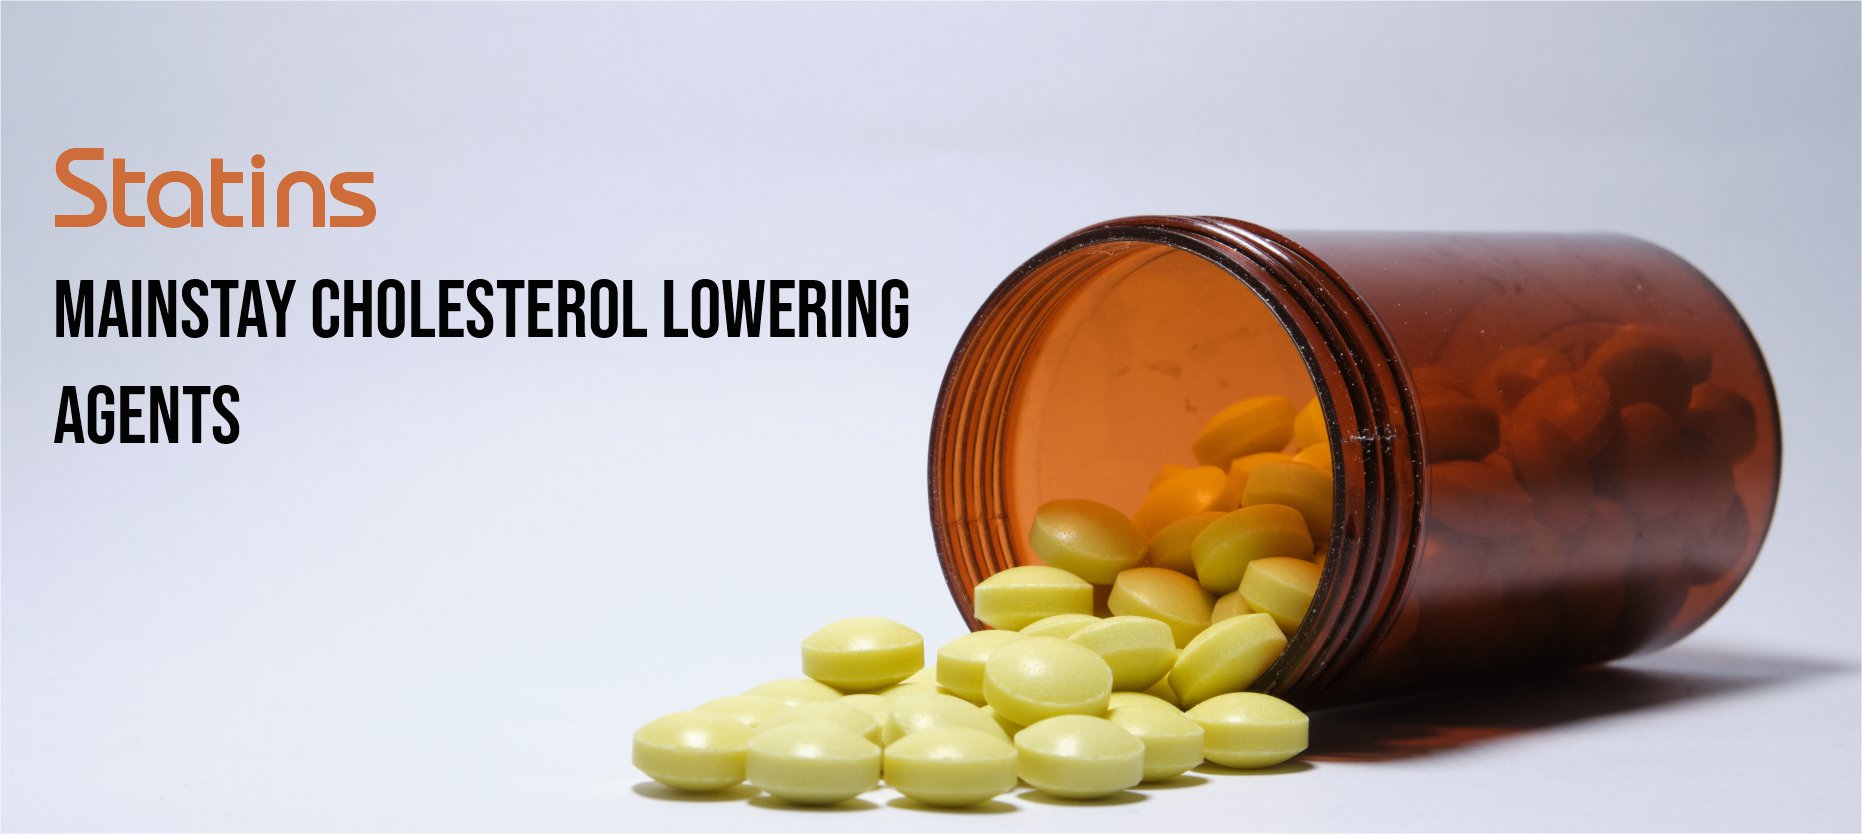 Statins – The Mainstay Cholesterol Lowering Agents